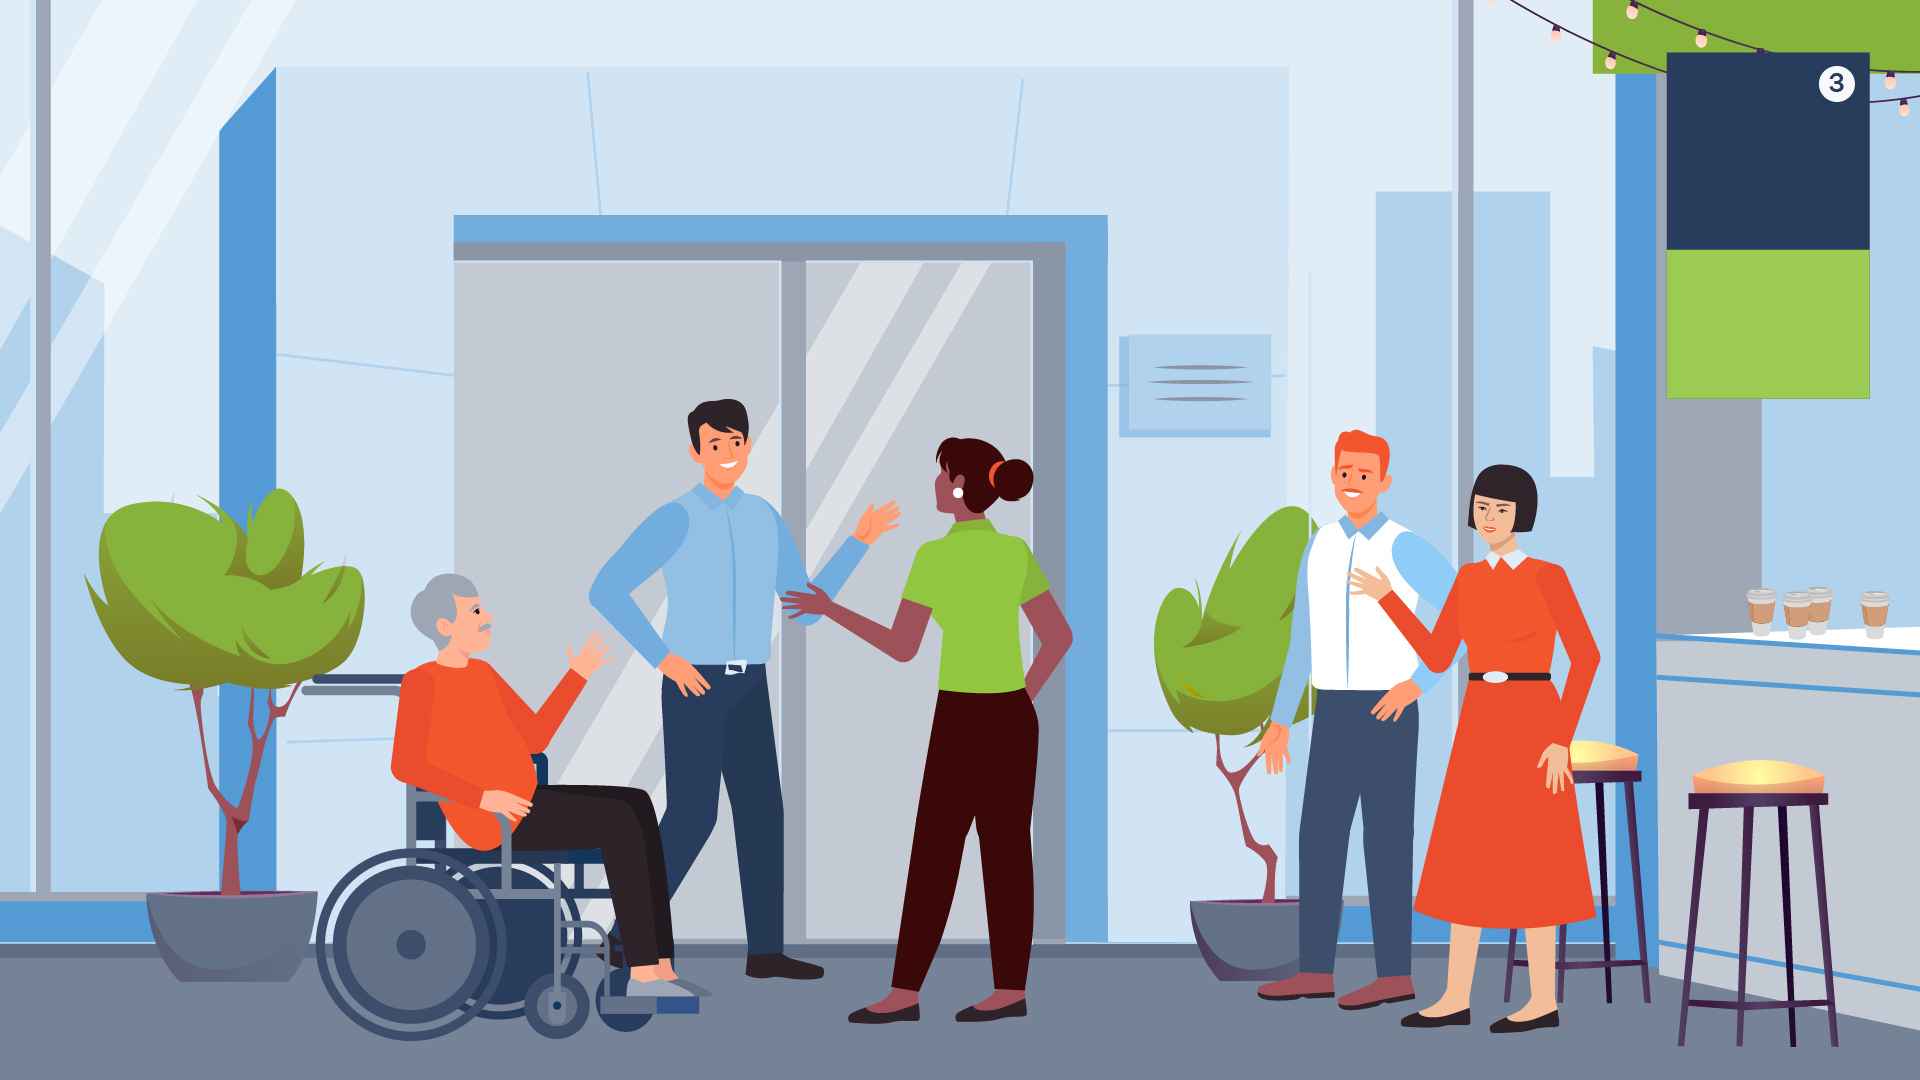 Animated educational video "What awaits you at a new job?"